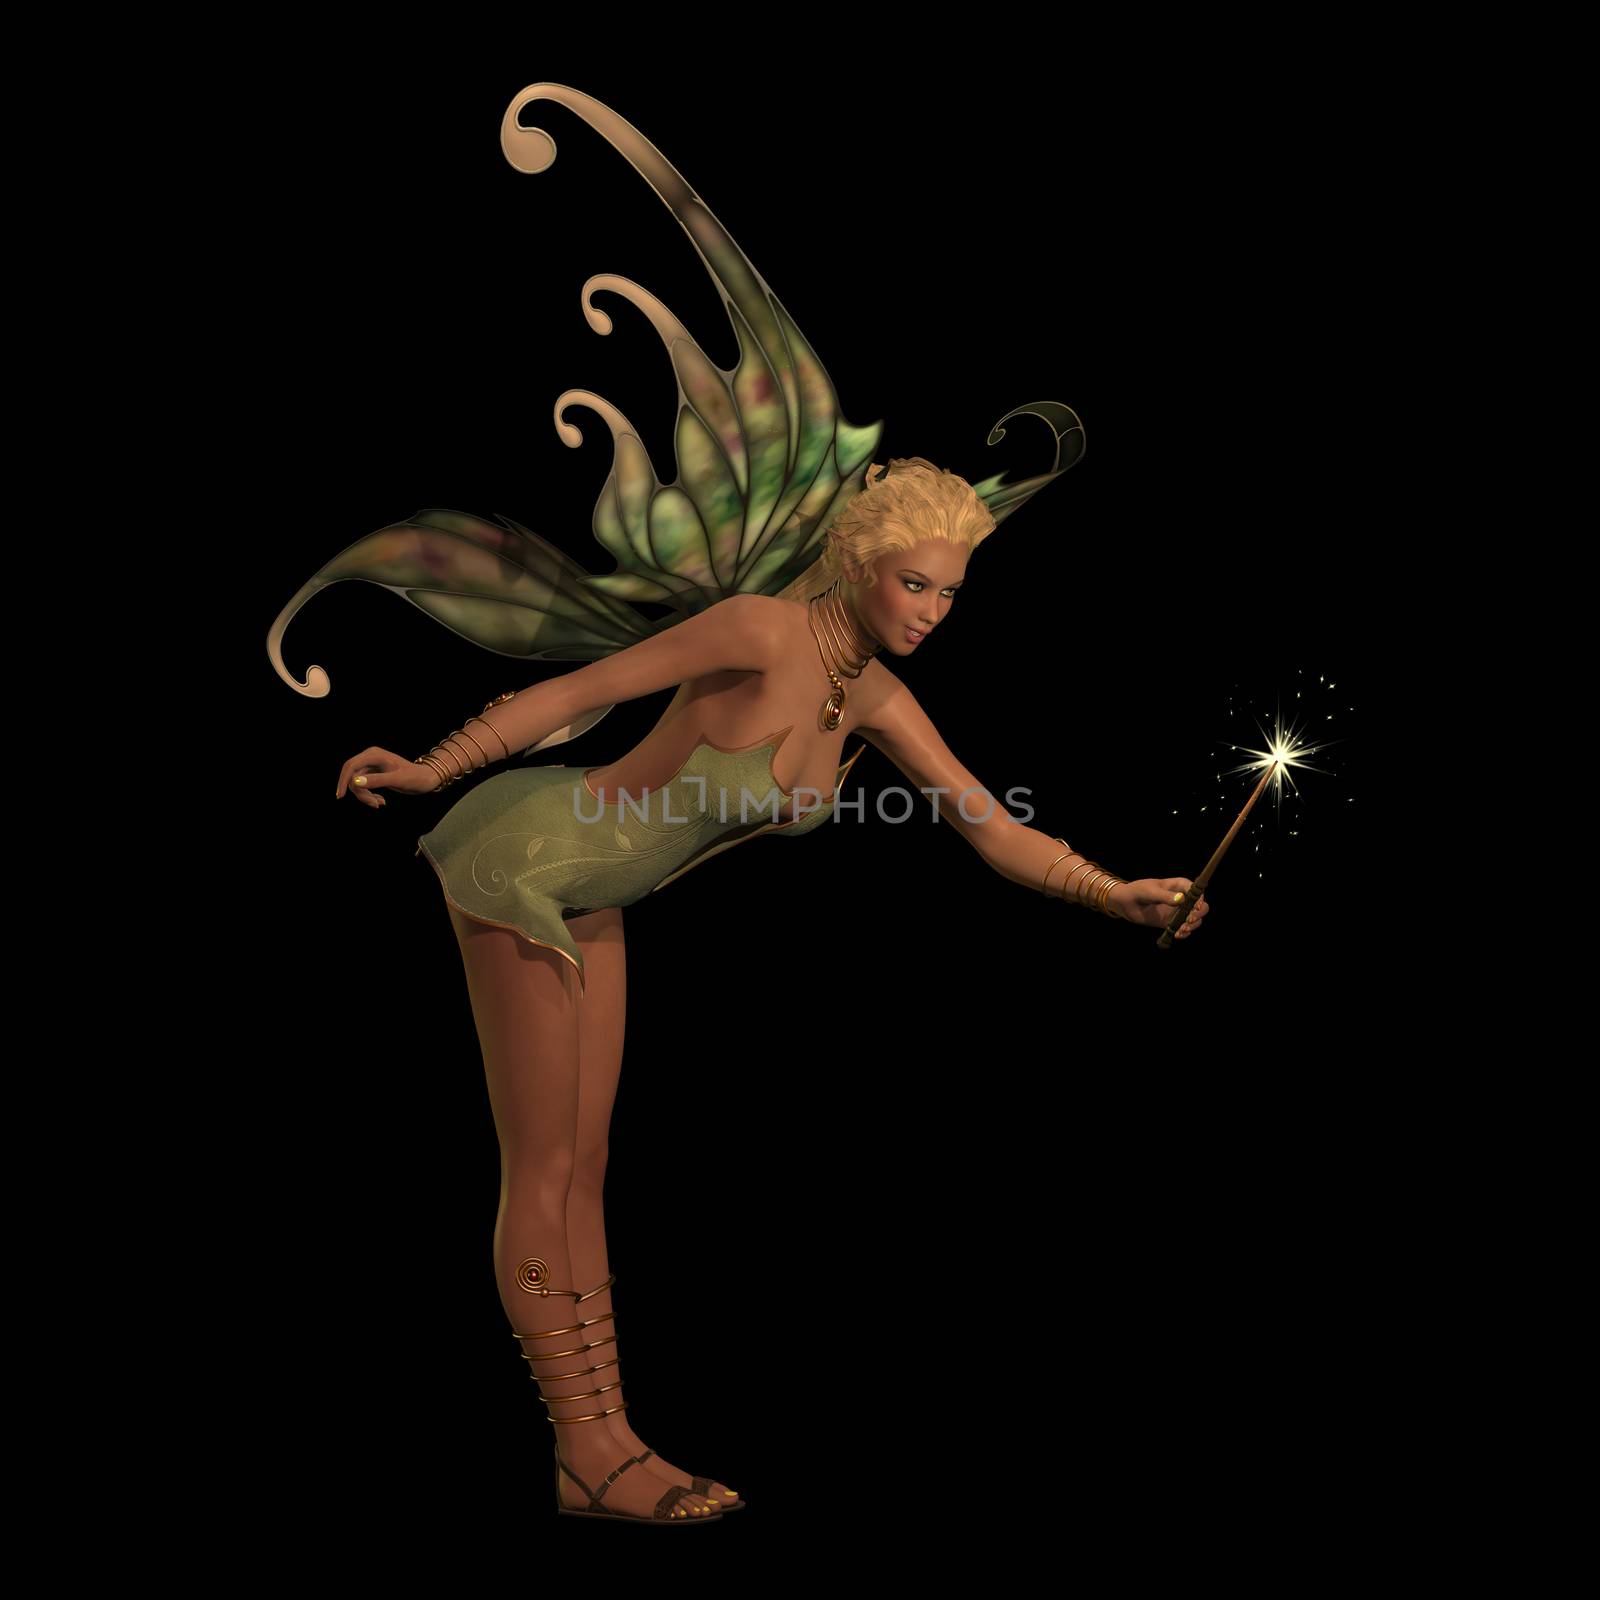 A fairy is a creature of folklore and legend and has pointed long ears, is small in stature and has wings.